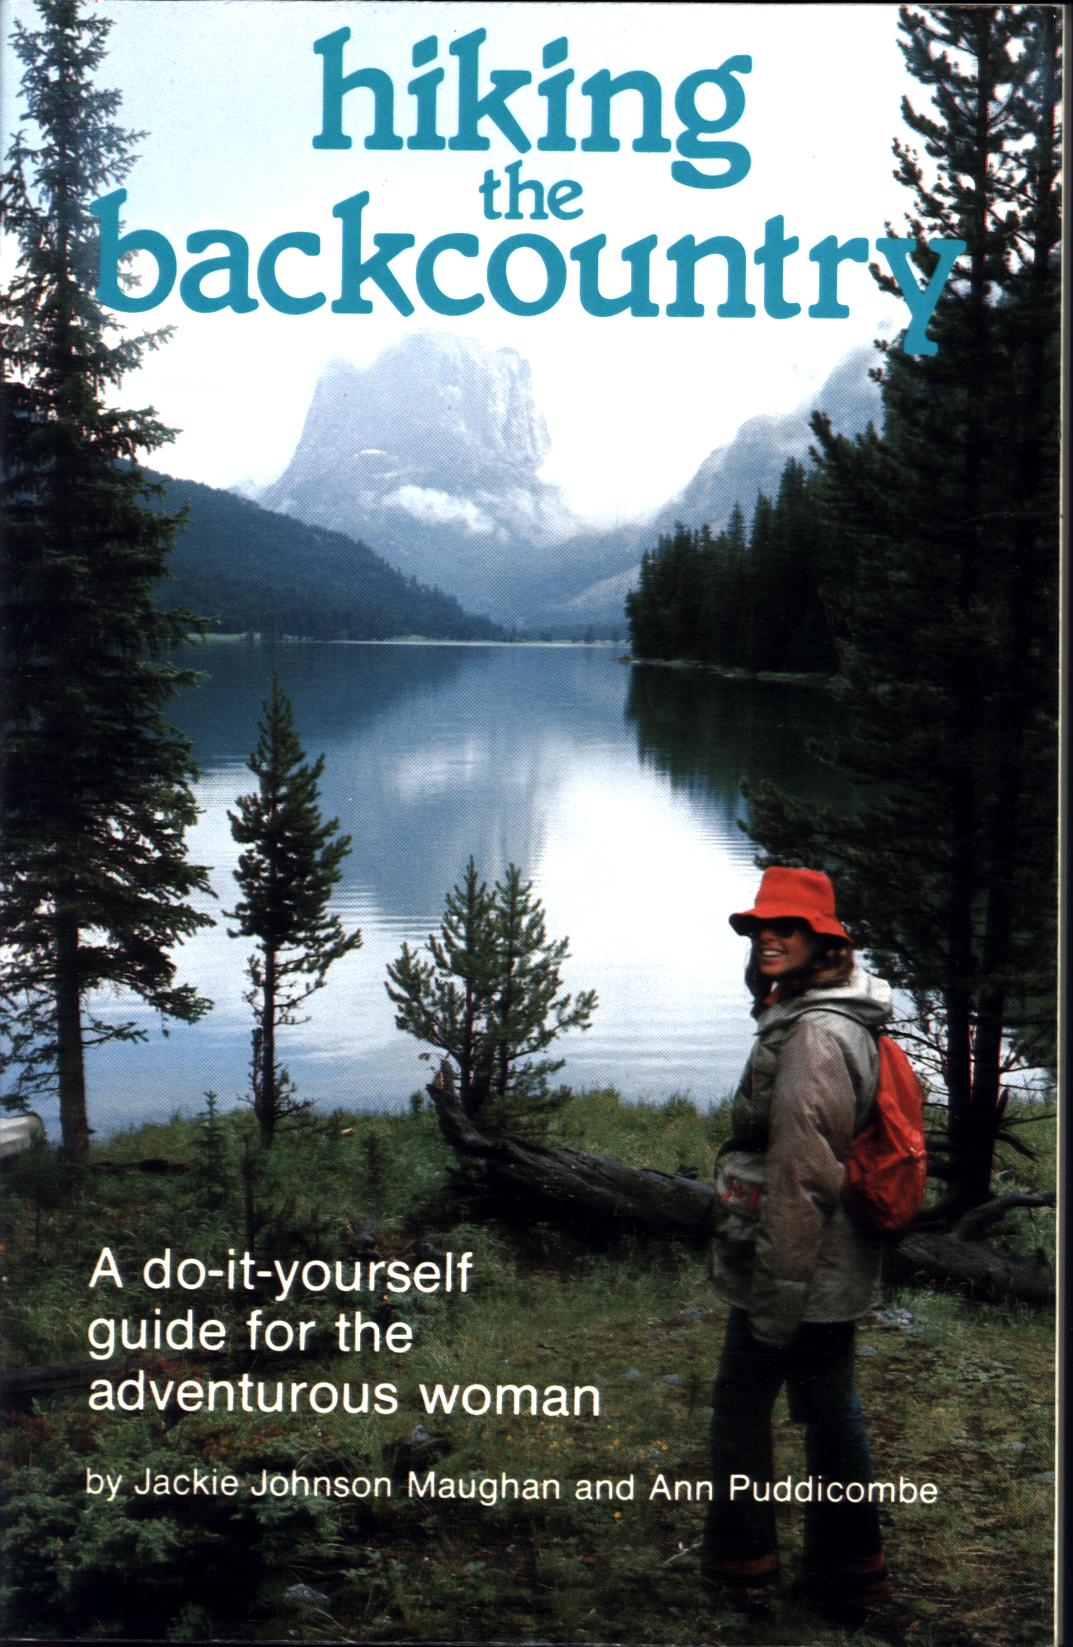 HIKING THE BACKCOUNTRY: a do-it-yourself guide for the adventurous woman.